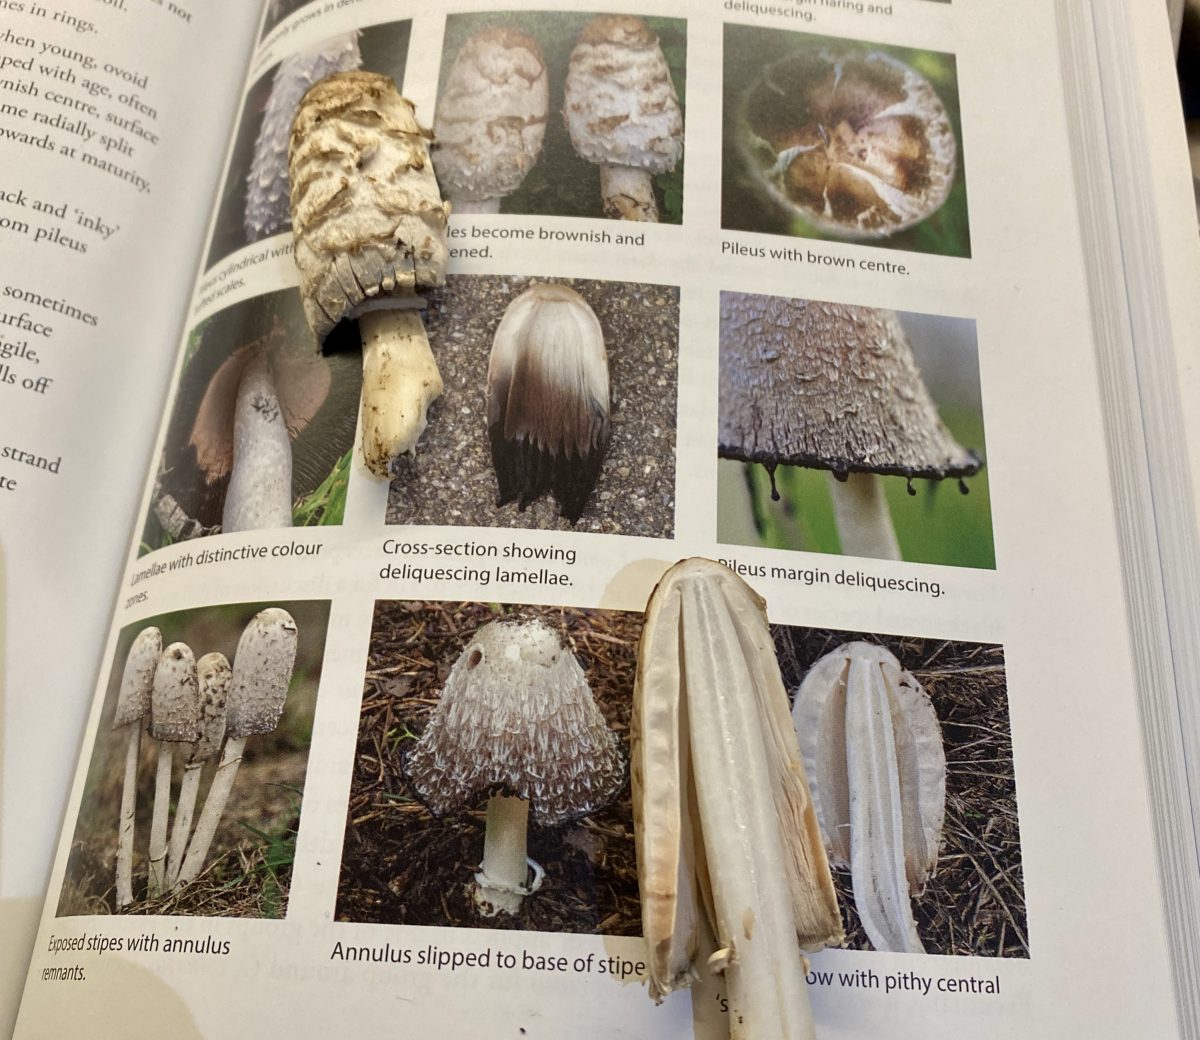 A book open to a page with different photos of mushrooms, and two mushrooms on top of the page for comparison.